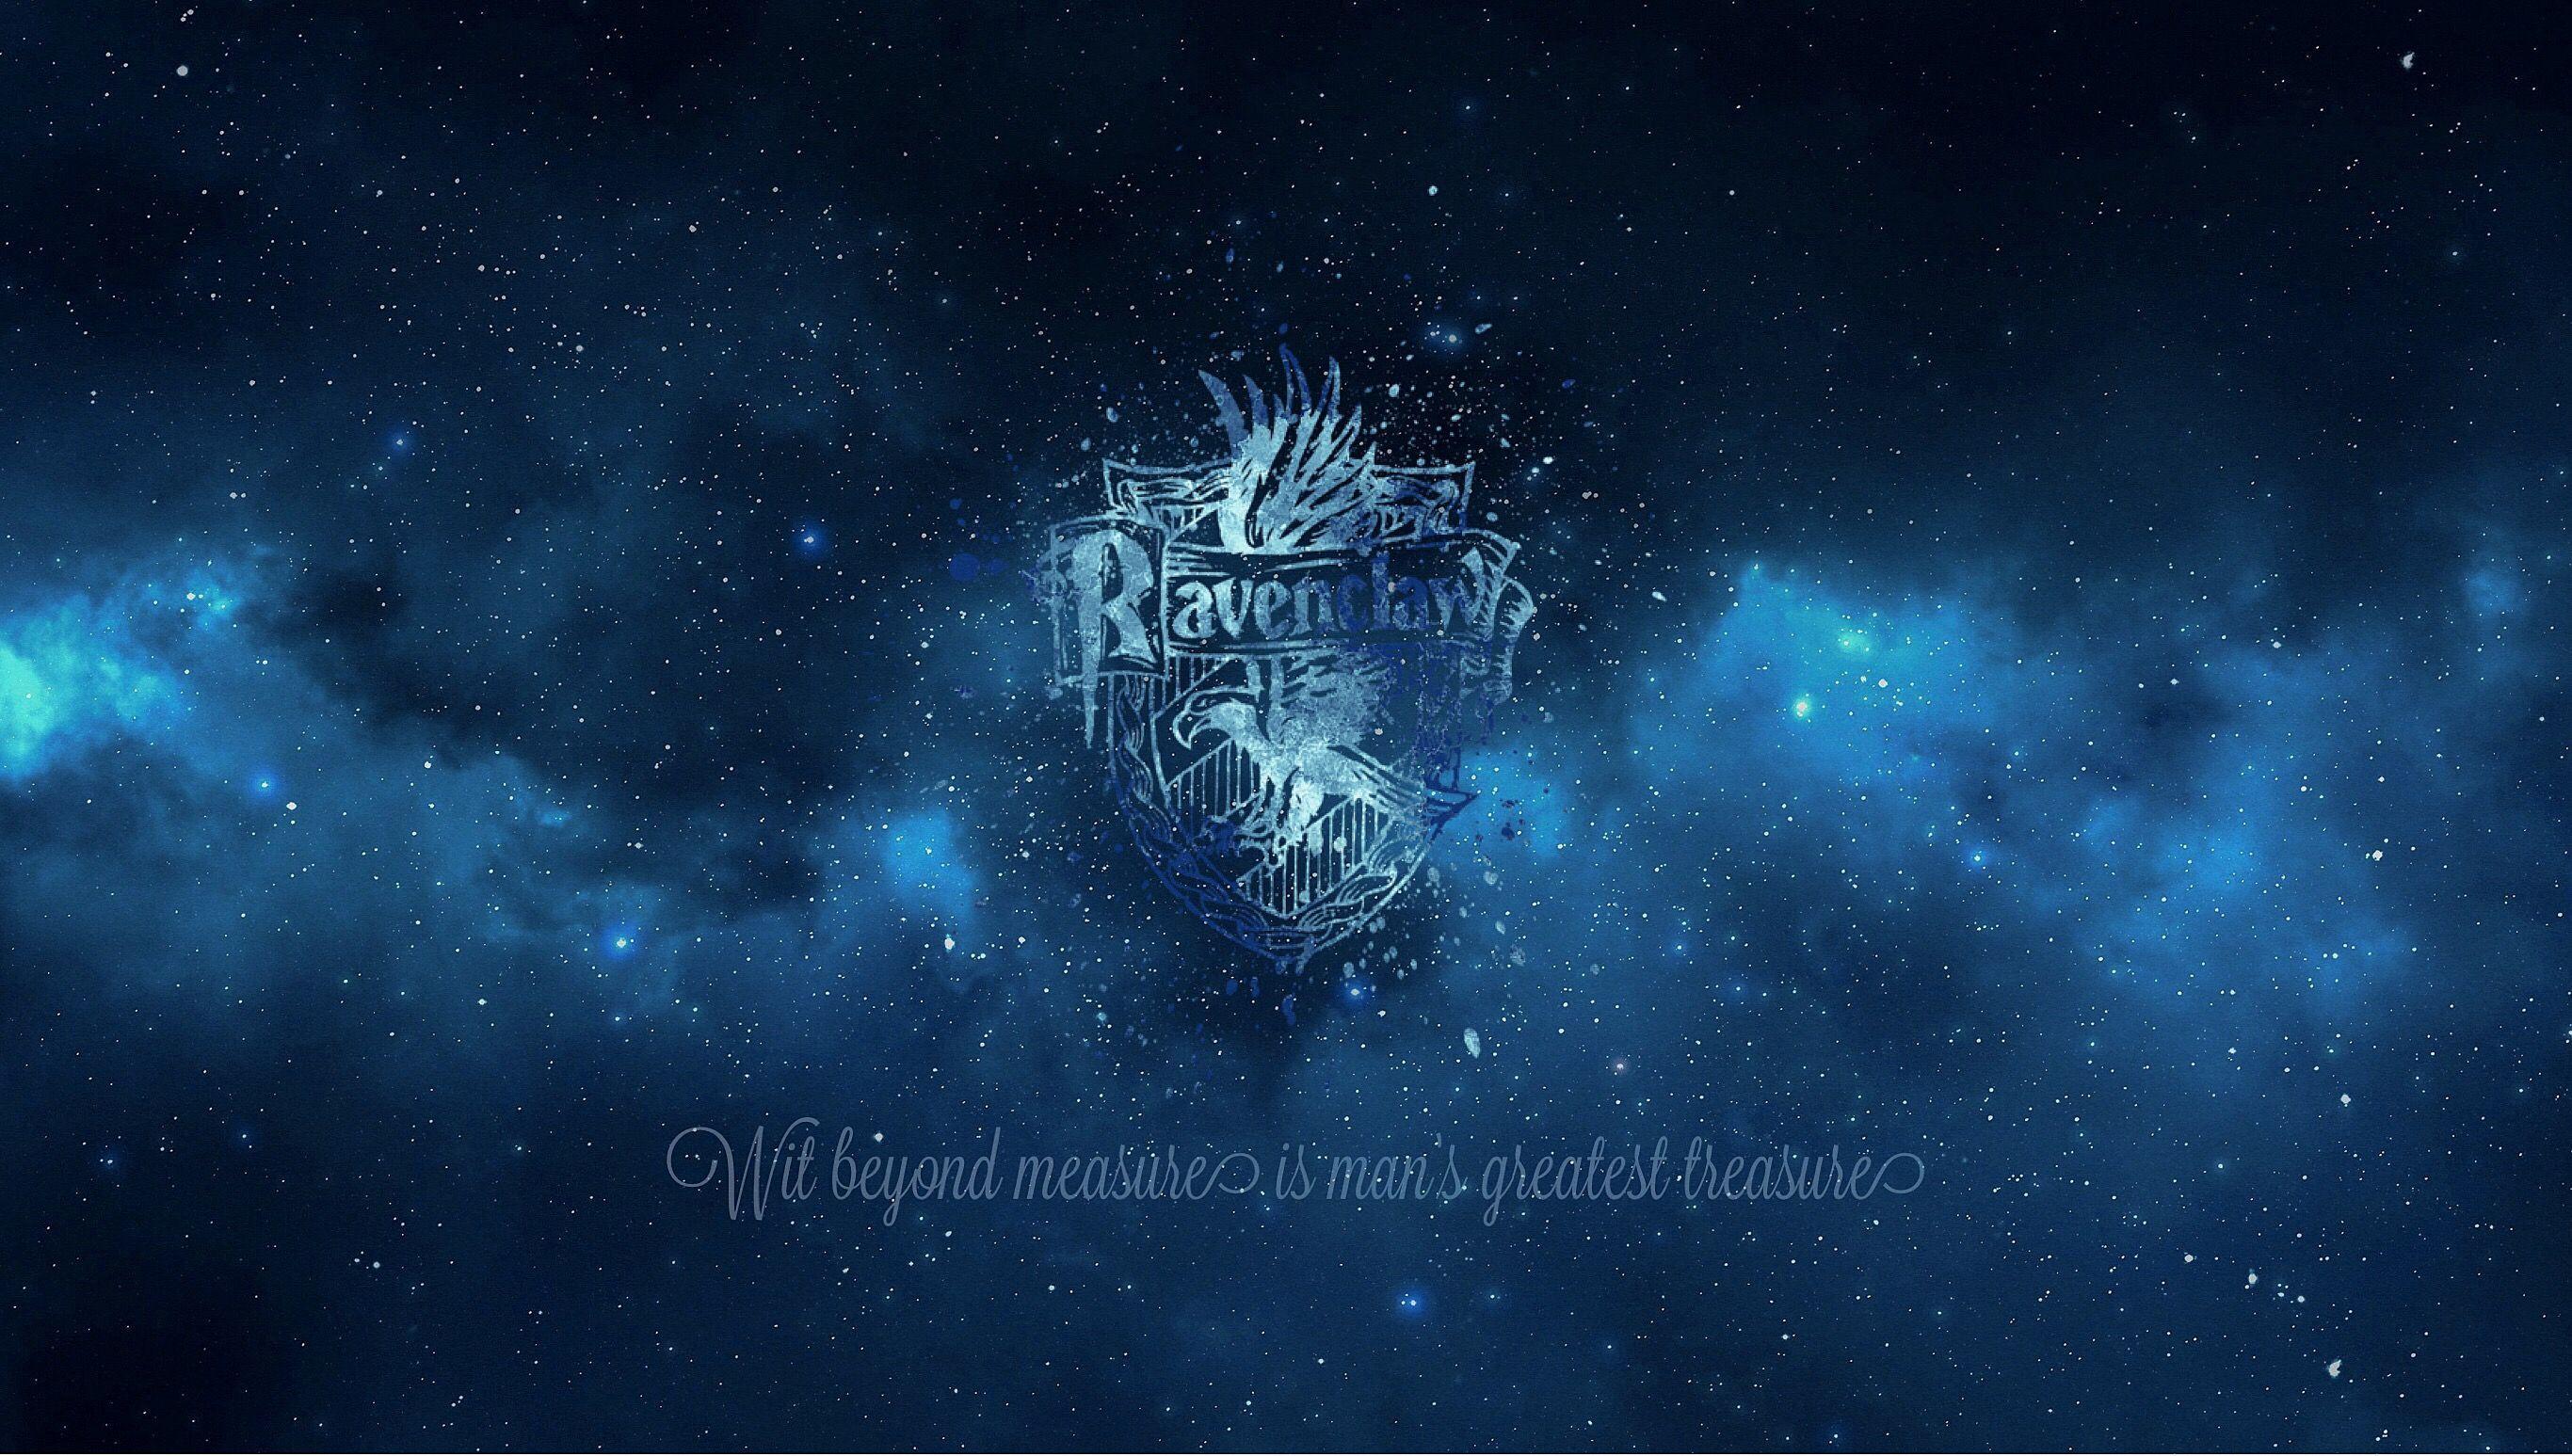 Harry Potter Iphone Wallpaper Ravenclaw Ravenclaw typography wallpaper